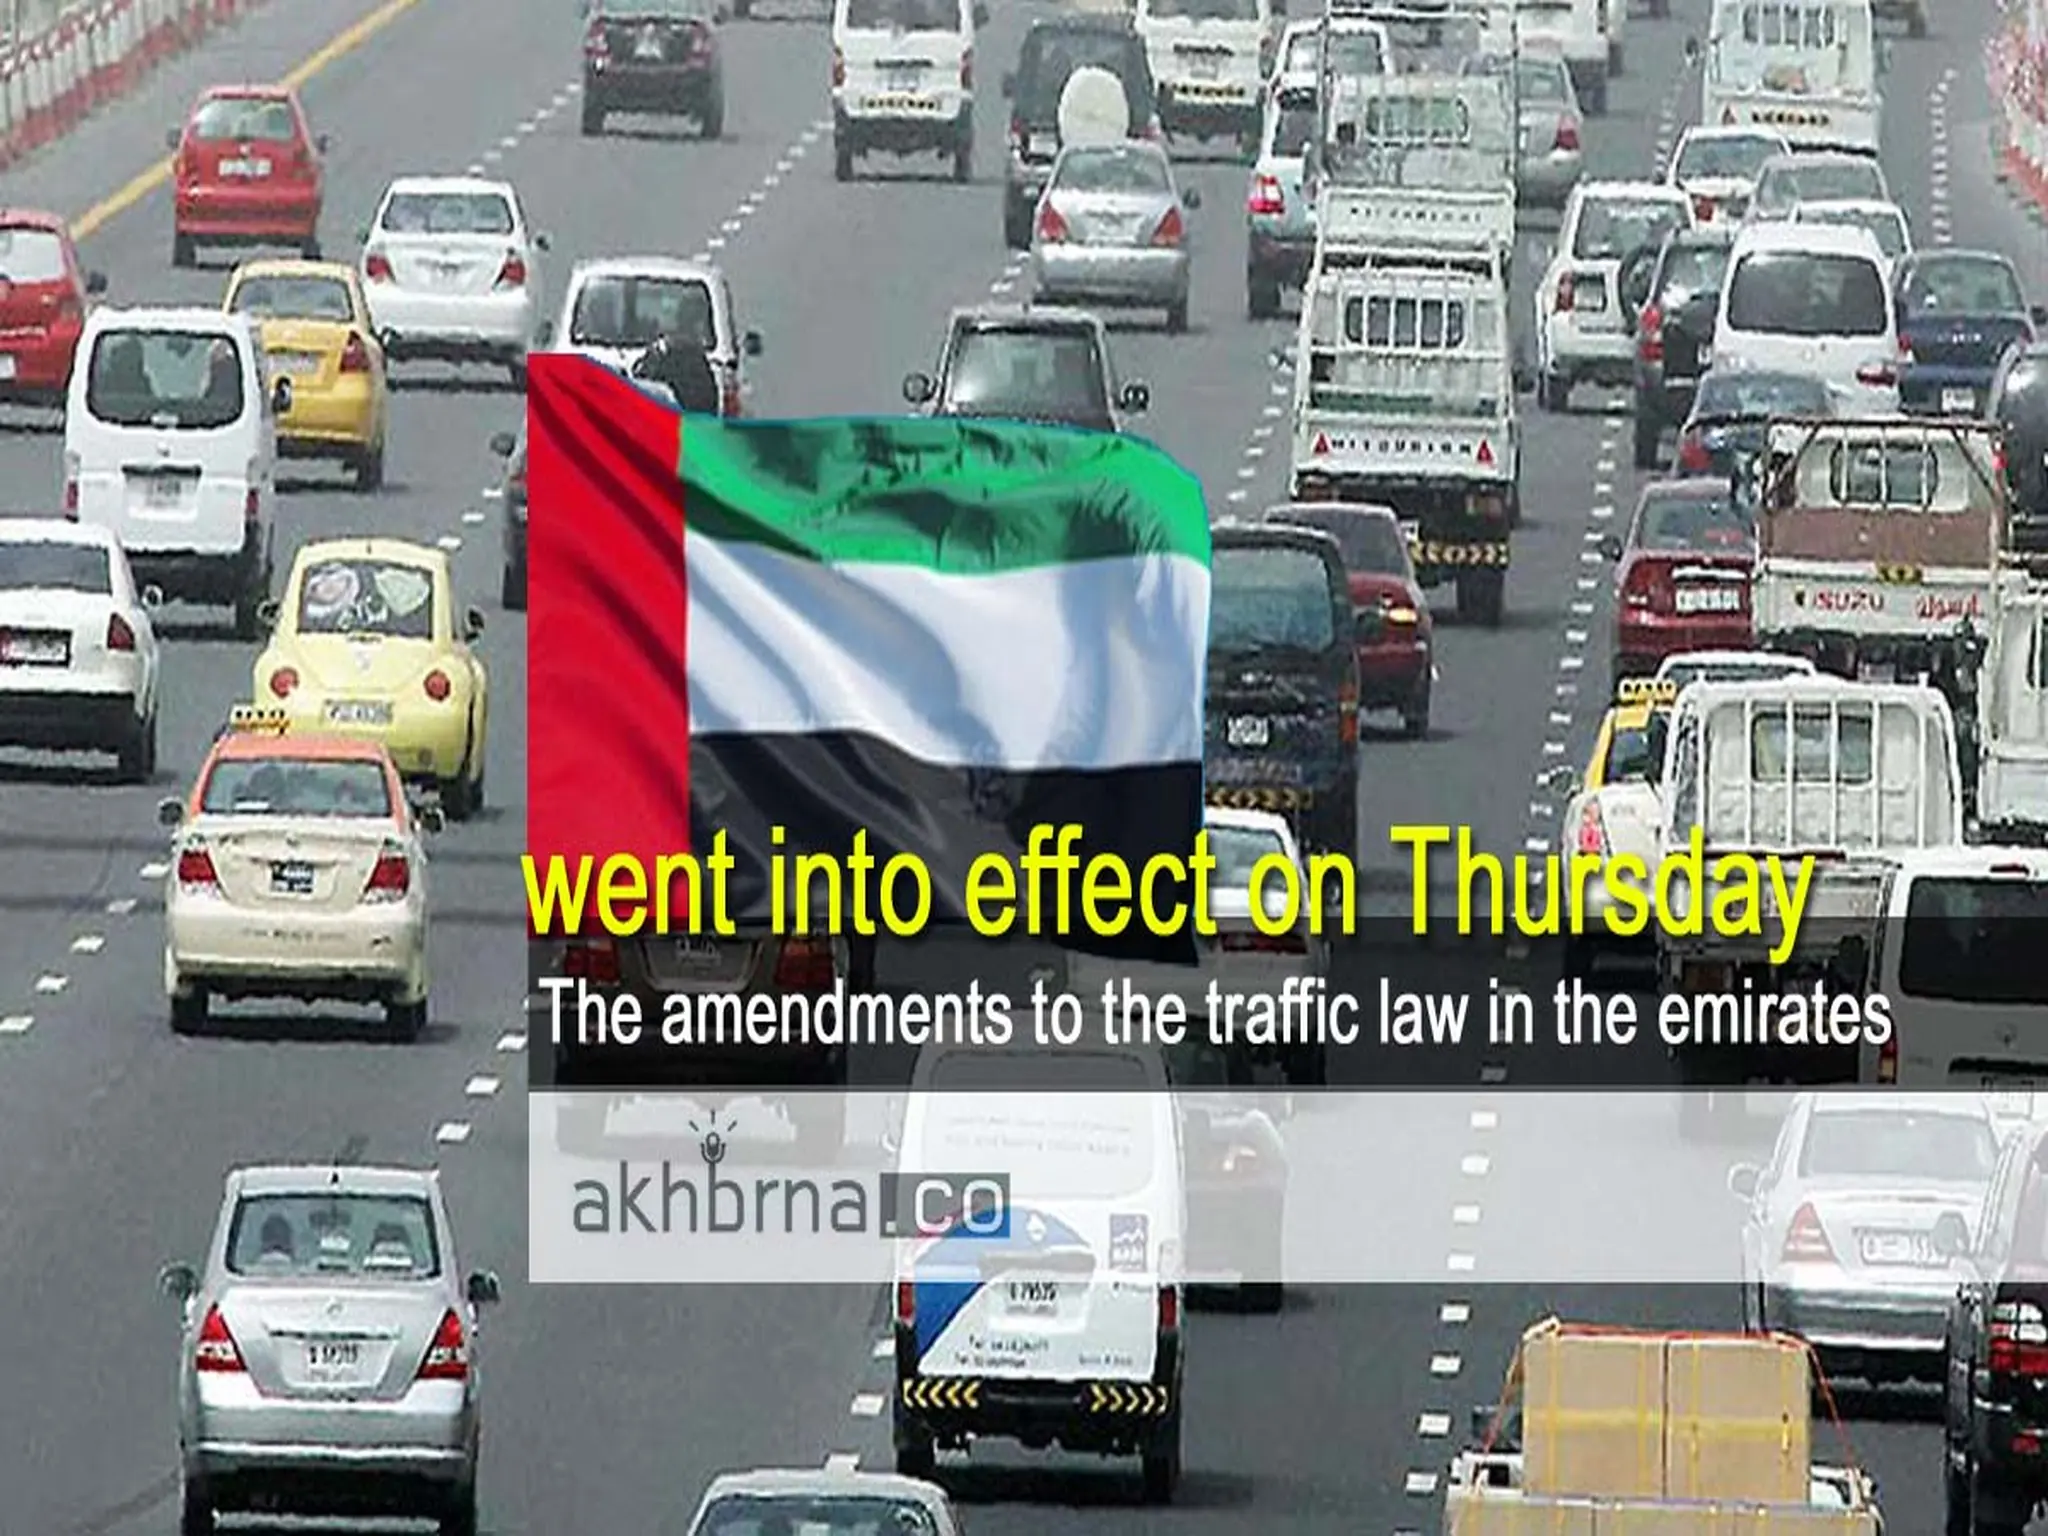 Dubai updates its traffic laws: Penalty for serious offences may cost as much as a new car